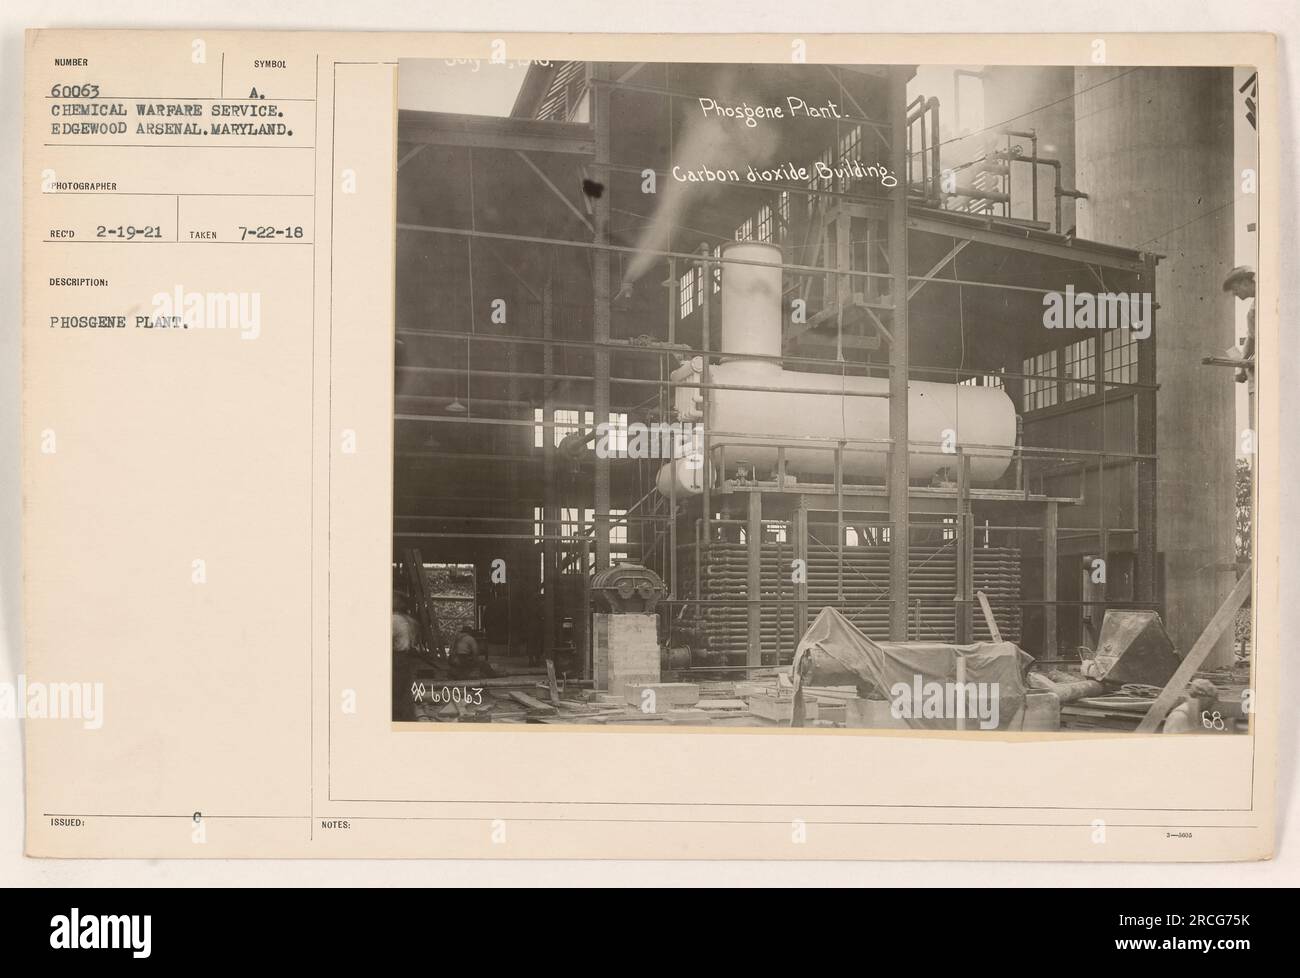 Phosgene production plant at Edgewood Arsenal in Maryland. This image shows building 3-4, which is used for carbon dioxide processing in the production of phosgene gas. Taken on July 22, 1918, the photograph is part of the Chemical Warfare Service collection. Stock Photo